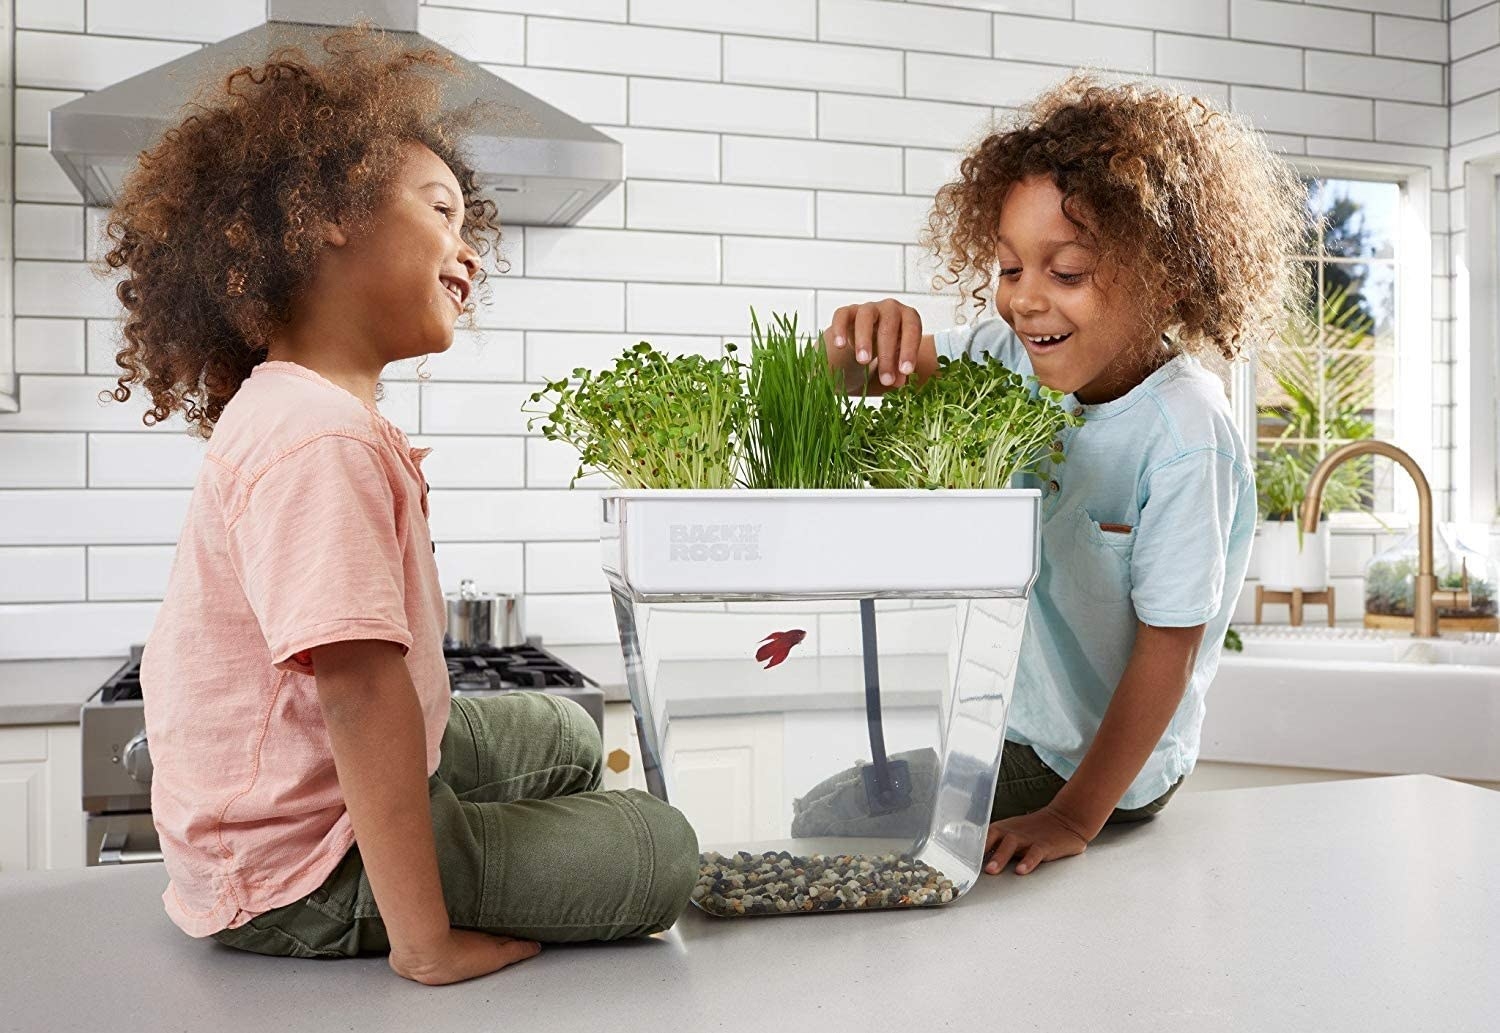 Kids sitting on a kitchen counter top next to the product